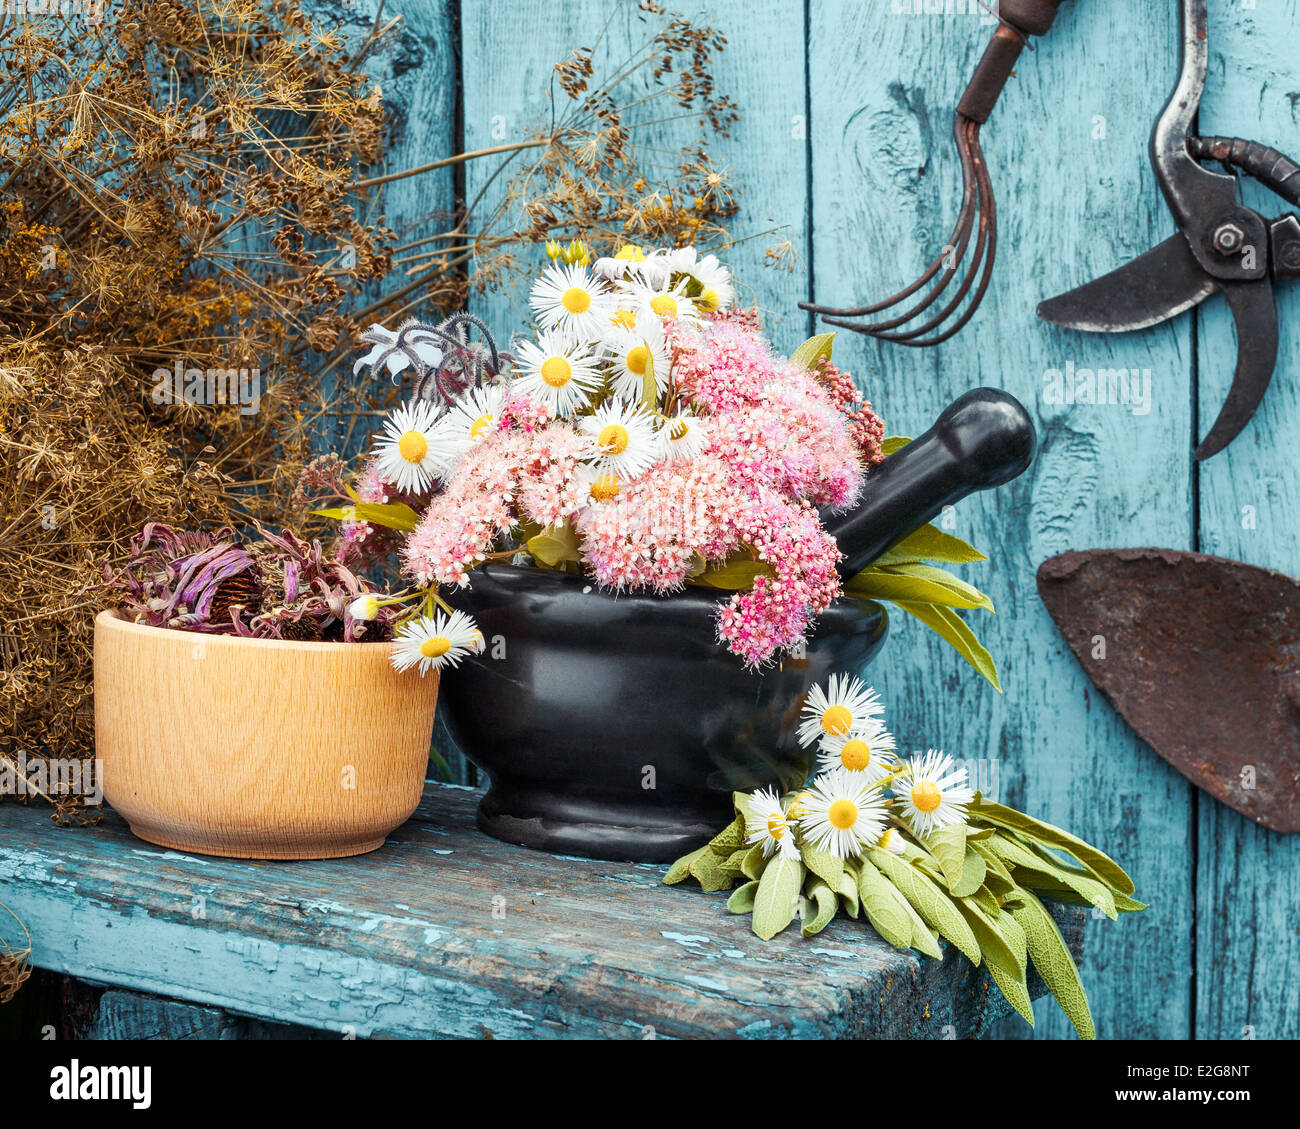 mortar with healing herbs and garden equipment outdoors Stock Photo